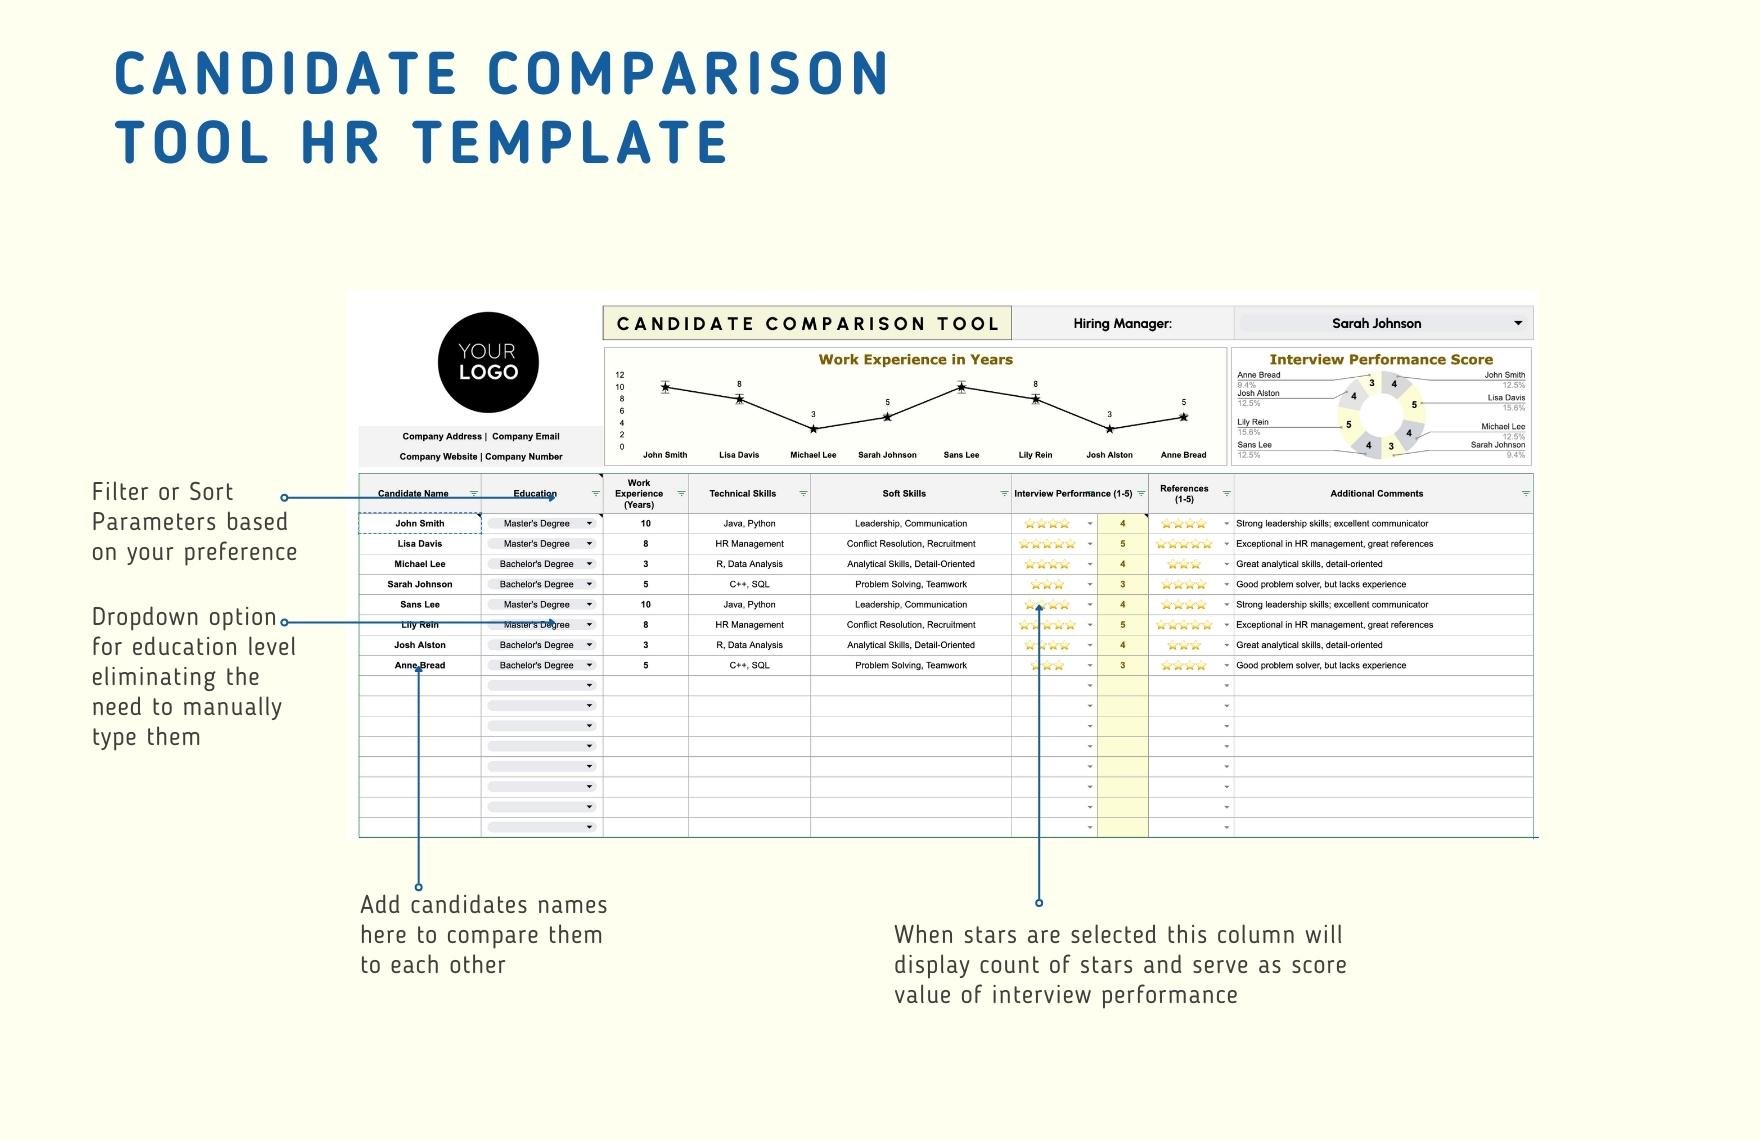 Candidate Comparison Tool HR Template